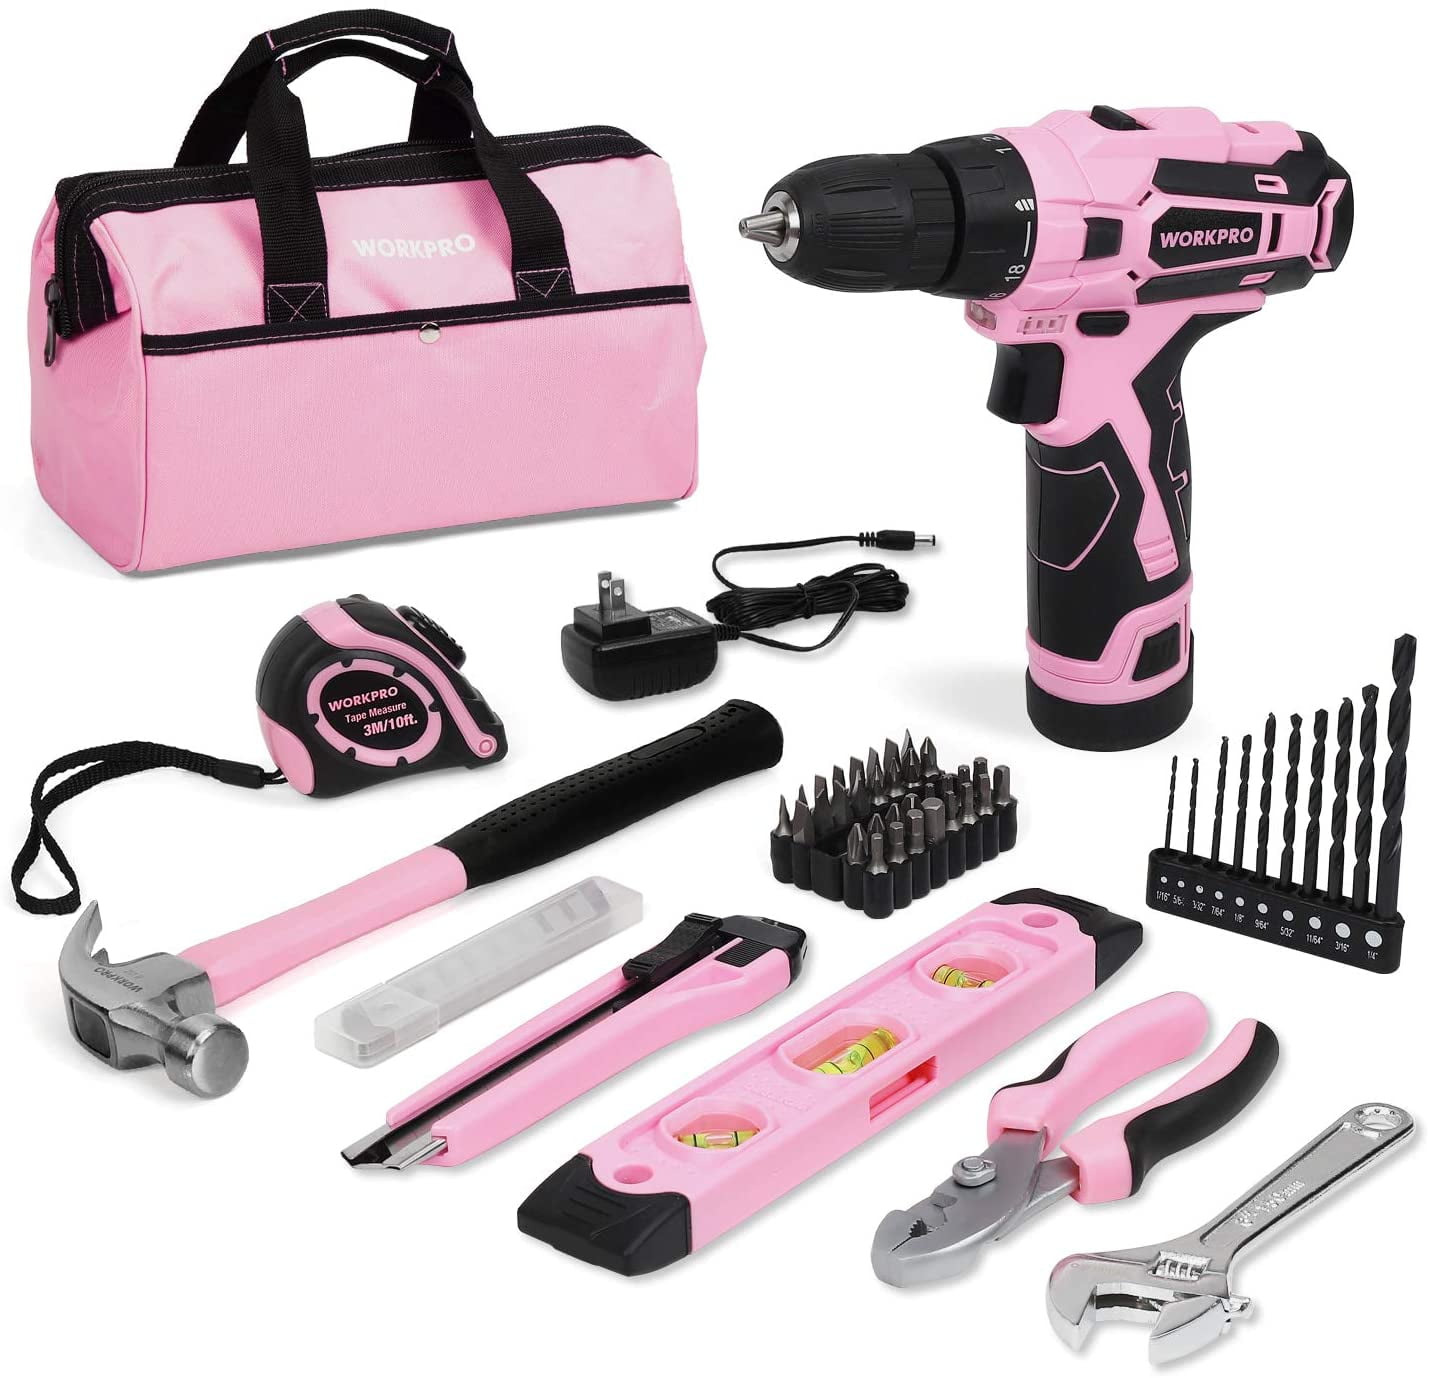 WORKPRO 12V Pink Cordless Drill and Home Tool Kit, 61 Pieces Hand Tool for  DIY, Home Maintenance, 14-inch Storage Bag Included - Pink Ribbon